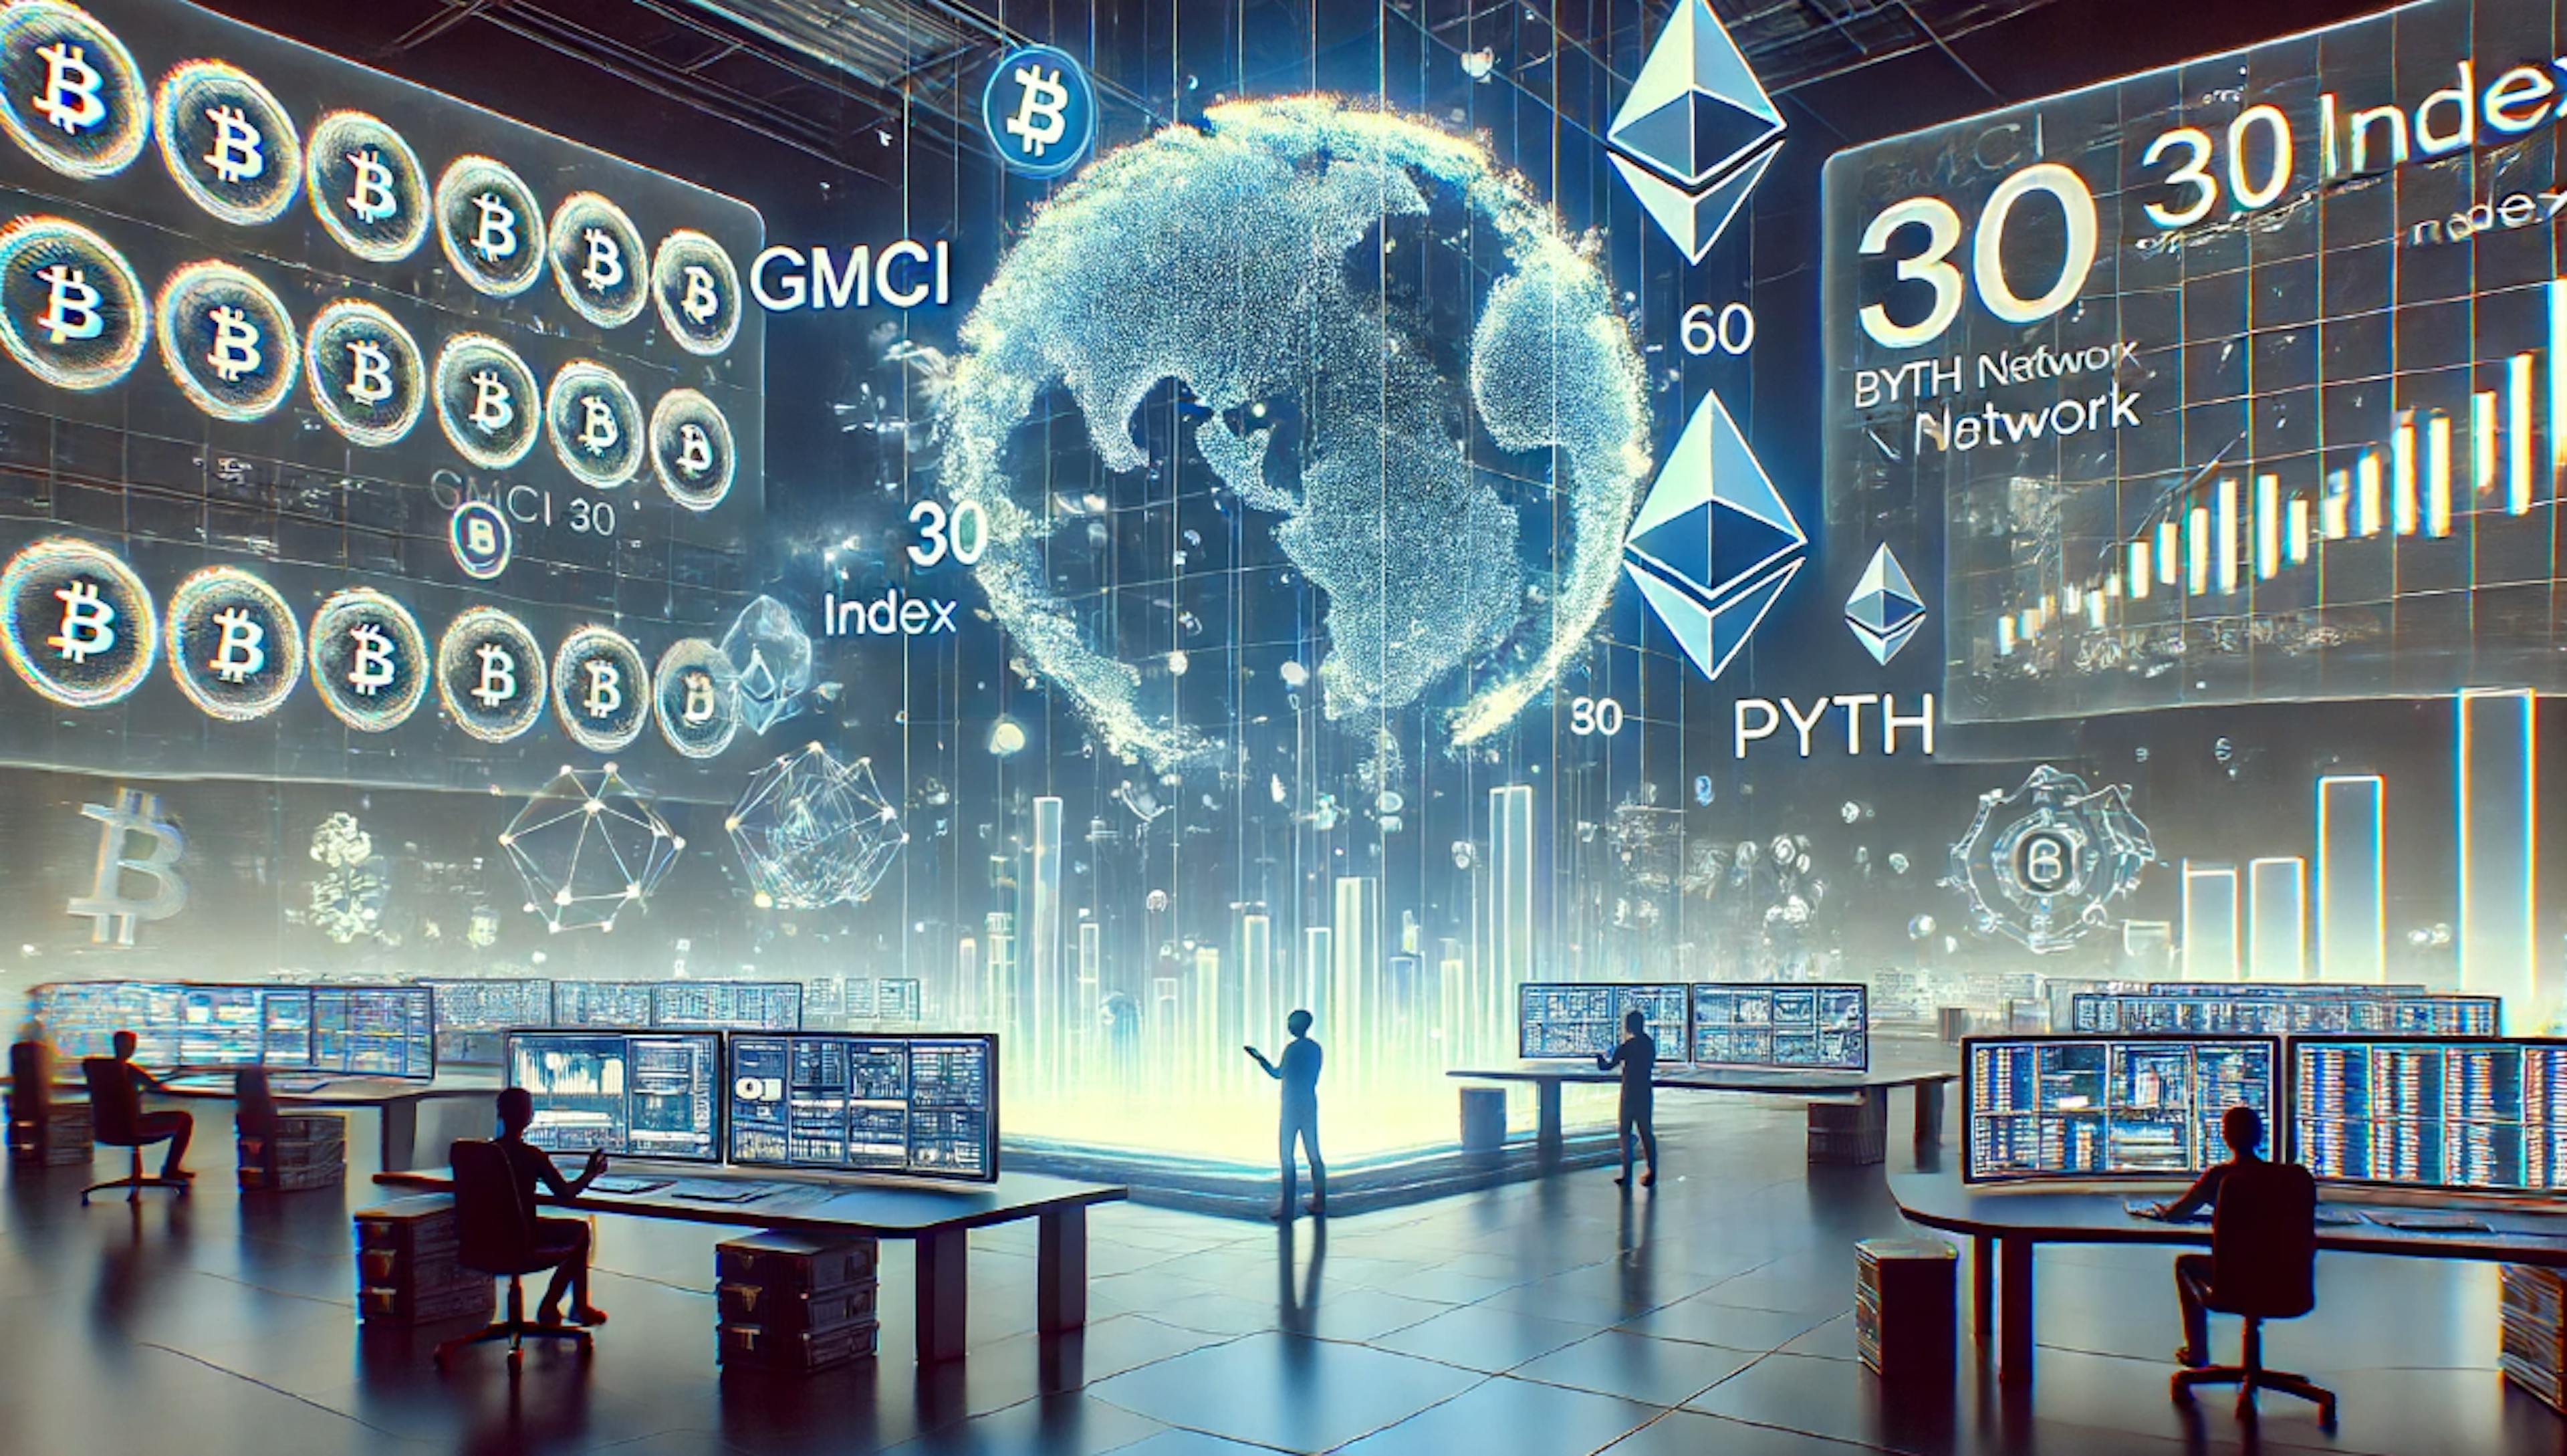 featured image - GMCI 30 Index Launches on Pyth Network, Expanding Access to Cryptocurrency Market Data